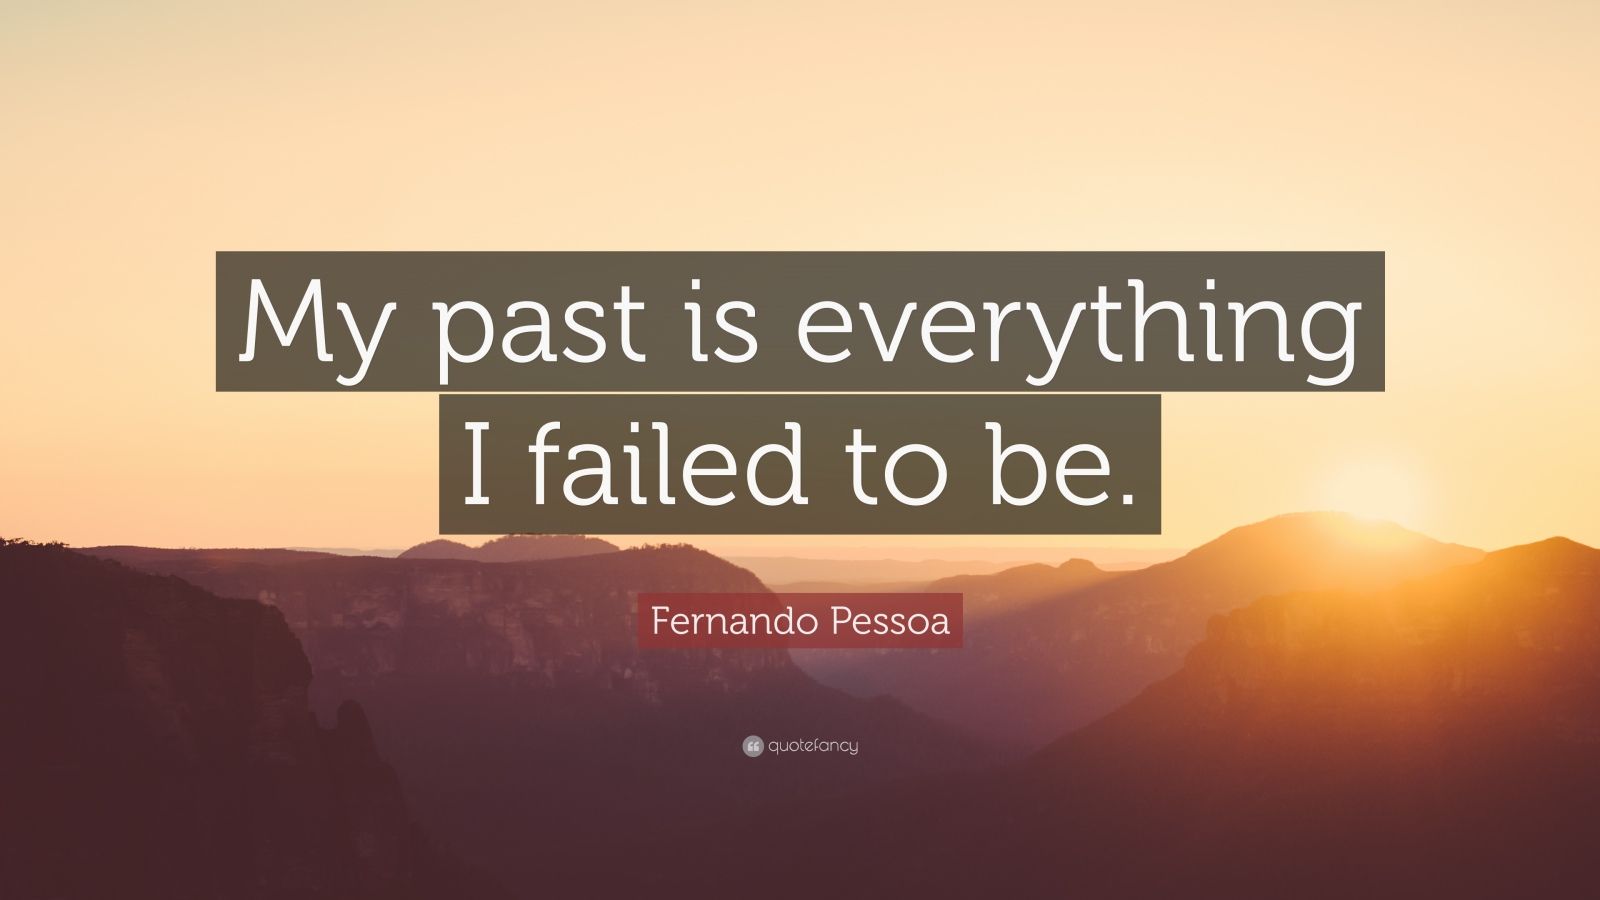 Fernando Pessoa Quote: “My past is everything I failed to be.”